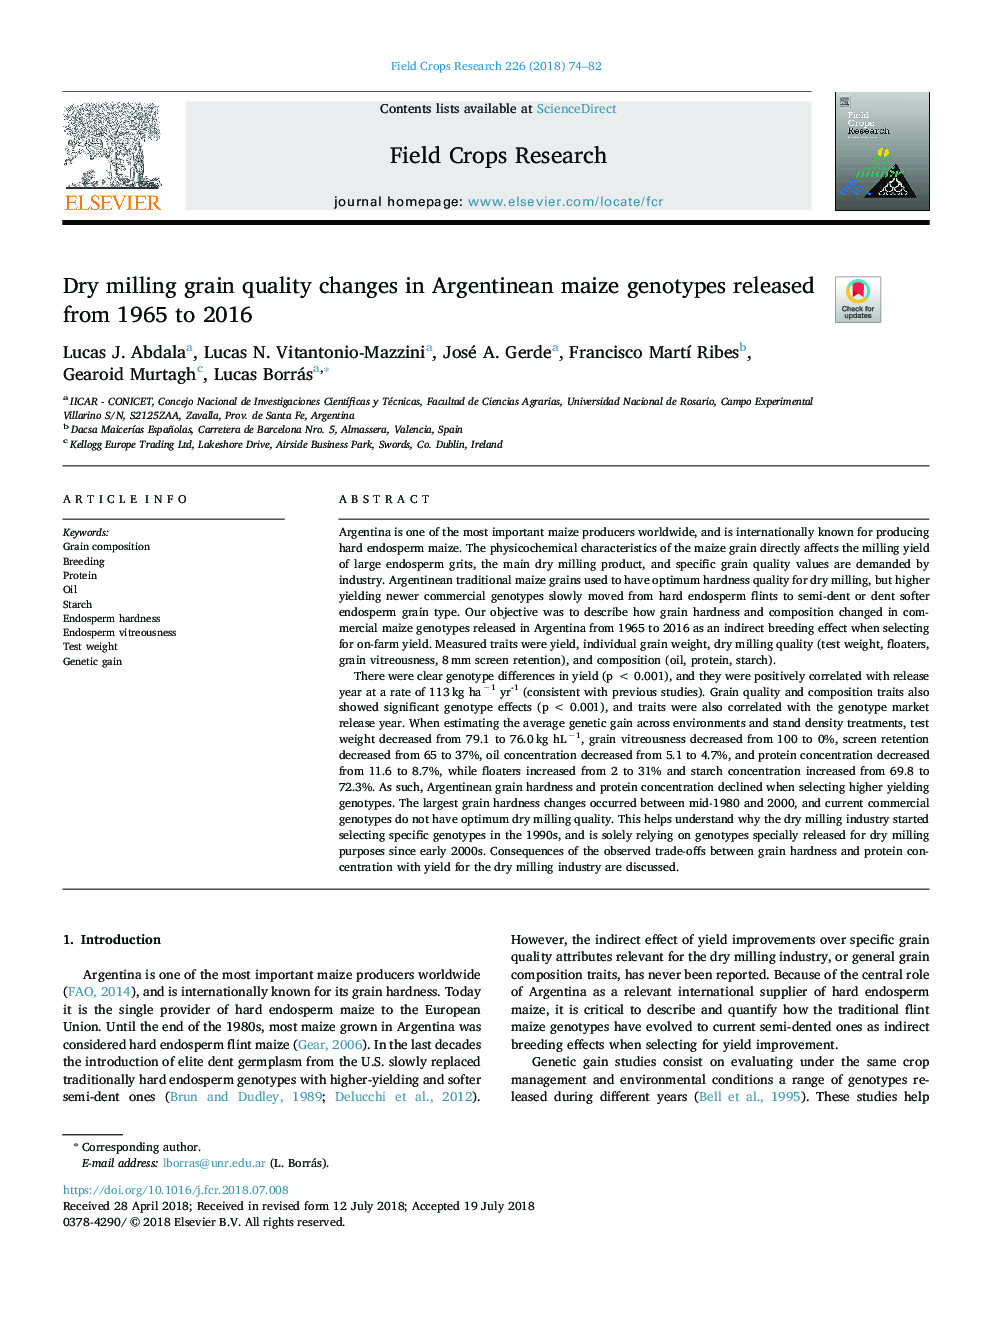 Dry milling grain quality changes in Argentinean maize genotypes released from 1965 to 2016